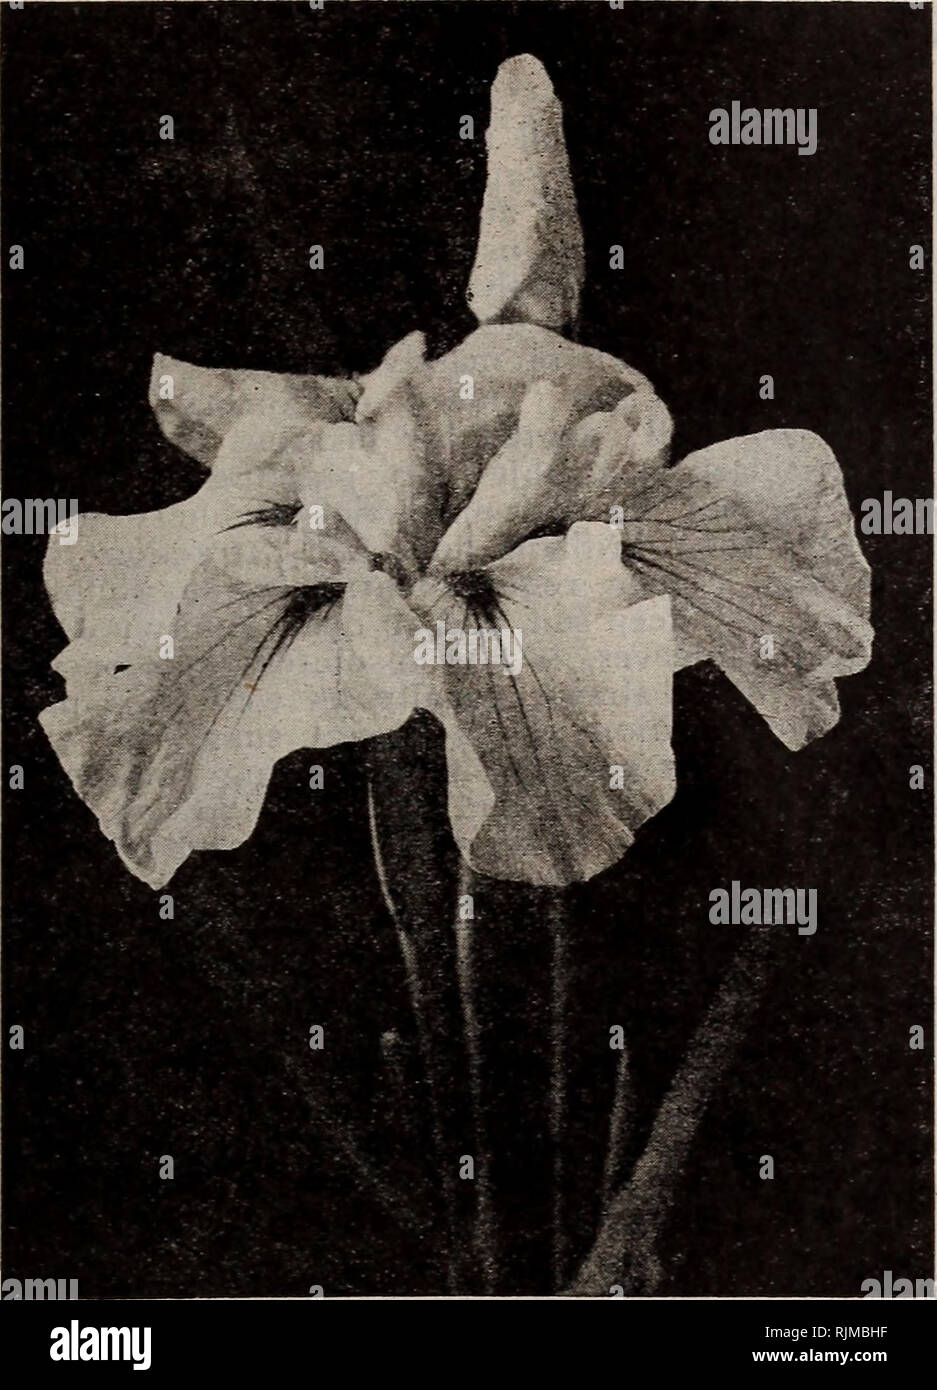 . Barnard's seeds, bulbs, shrubs 1918. Seeds Catalogs; Vegetables Seeds Catalogs; Flowers Seeds Catalogs; Fruit Seeds Catalogs; Nurseries (Horticulture) Catalogs. HARDY PHLOX Japanese Iris GERMAN IRIS—Continued shade. The blending of tints and colorings are rare for an iris. Each, 25c; doz., $2.50. Mad. Chereau. Pure white, edged with azure blue; falls deep white with blue penciling. Each, 15c; doz., $1.50. Mrs. H. Darwin. Pure white, falls slightly reticulated vio- let at the base; very beautiful and free flowering. 2 ft. Early. Each, 20c; doz., $2.00. Pauline. Standards bright blue, falls a  Stock Photo